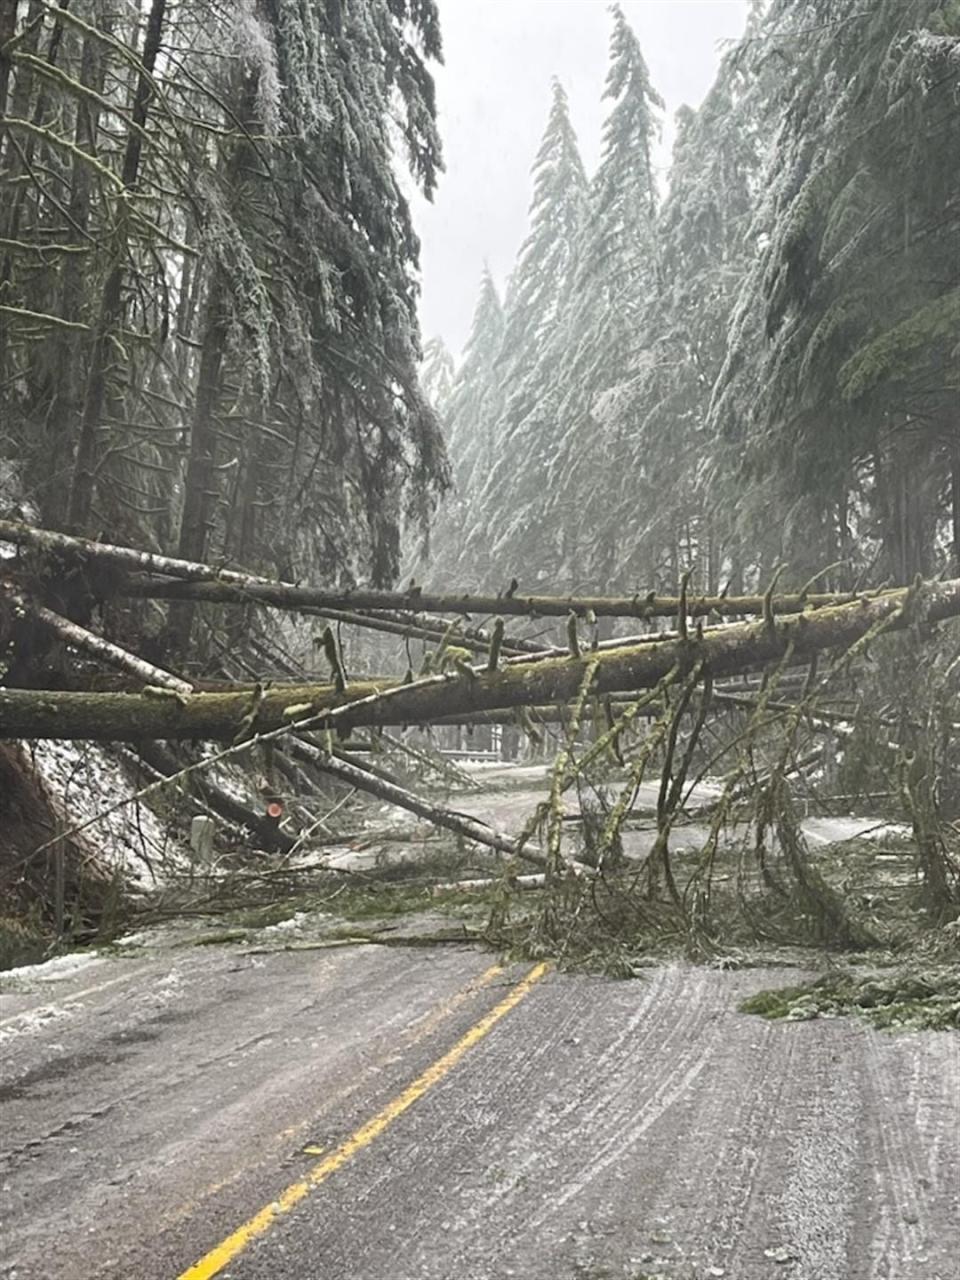 Highway 126 was closed by numerous downed trees and ice during the ice storm in the southern Willamette Valley, foothills and coast range.